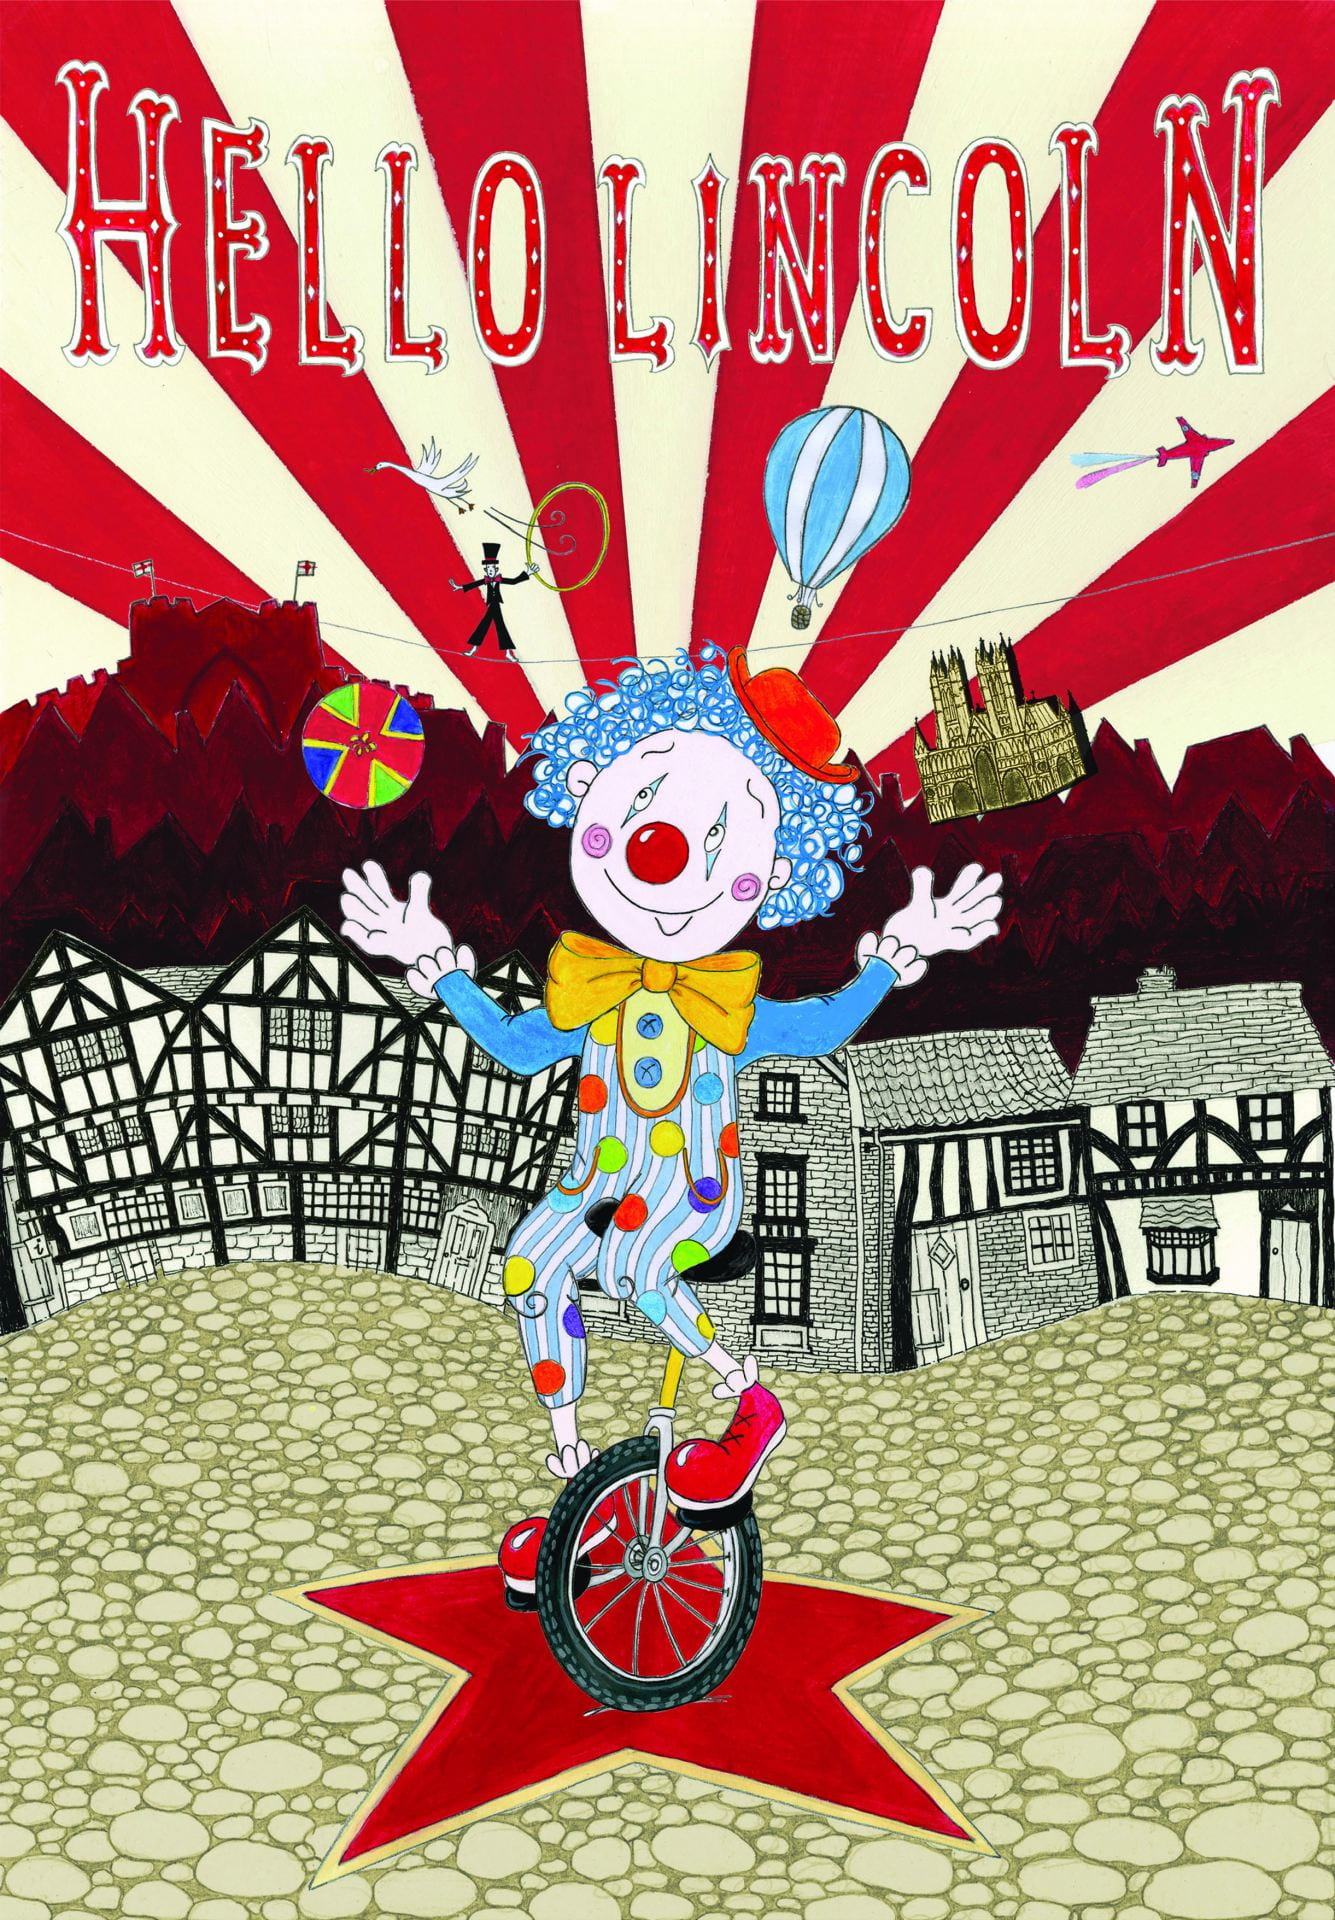 Illustration, a clown on a unicycle juggling, a red and white striped pattern with houses are in the background, text above reads: 